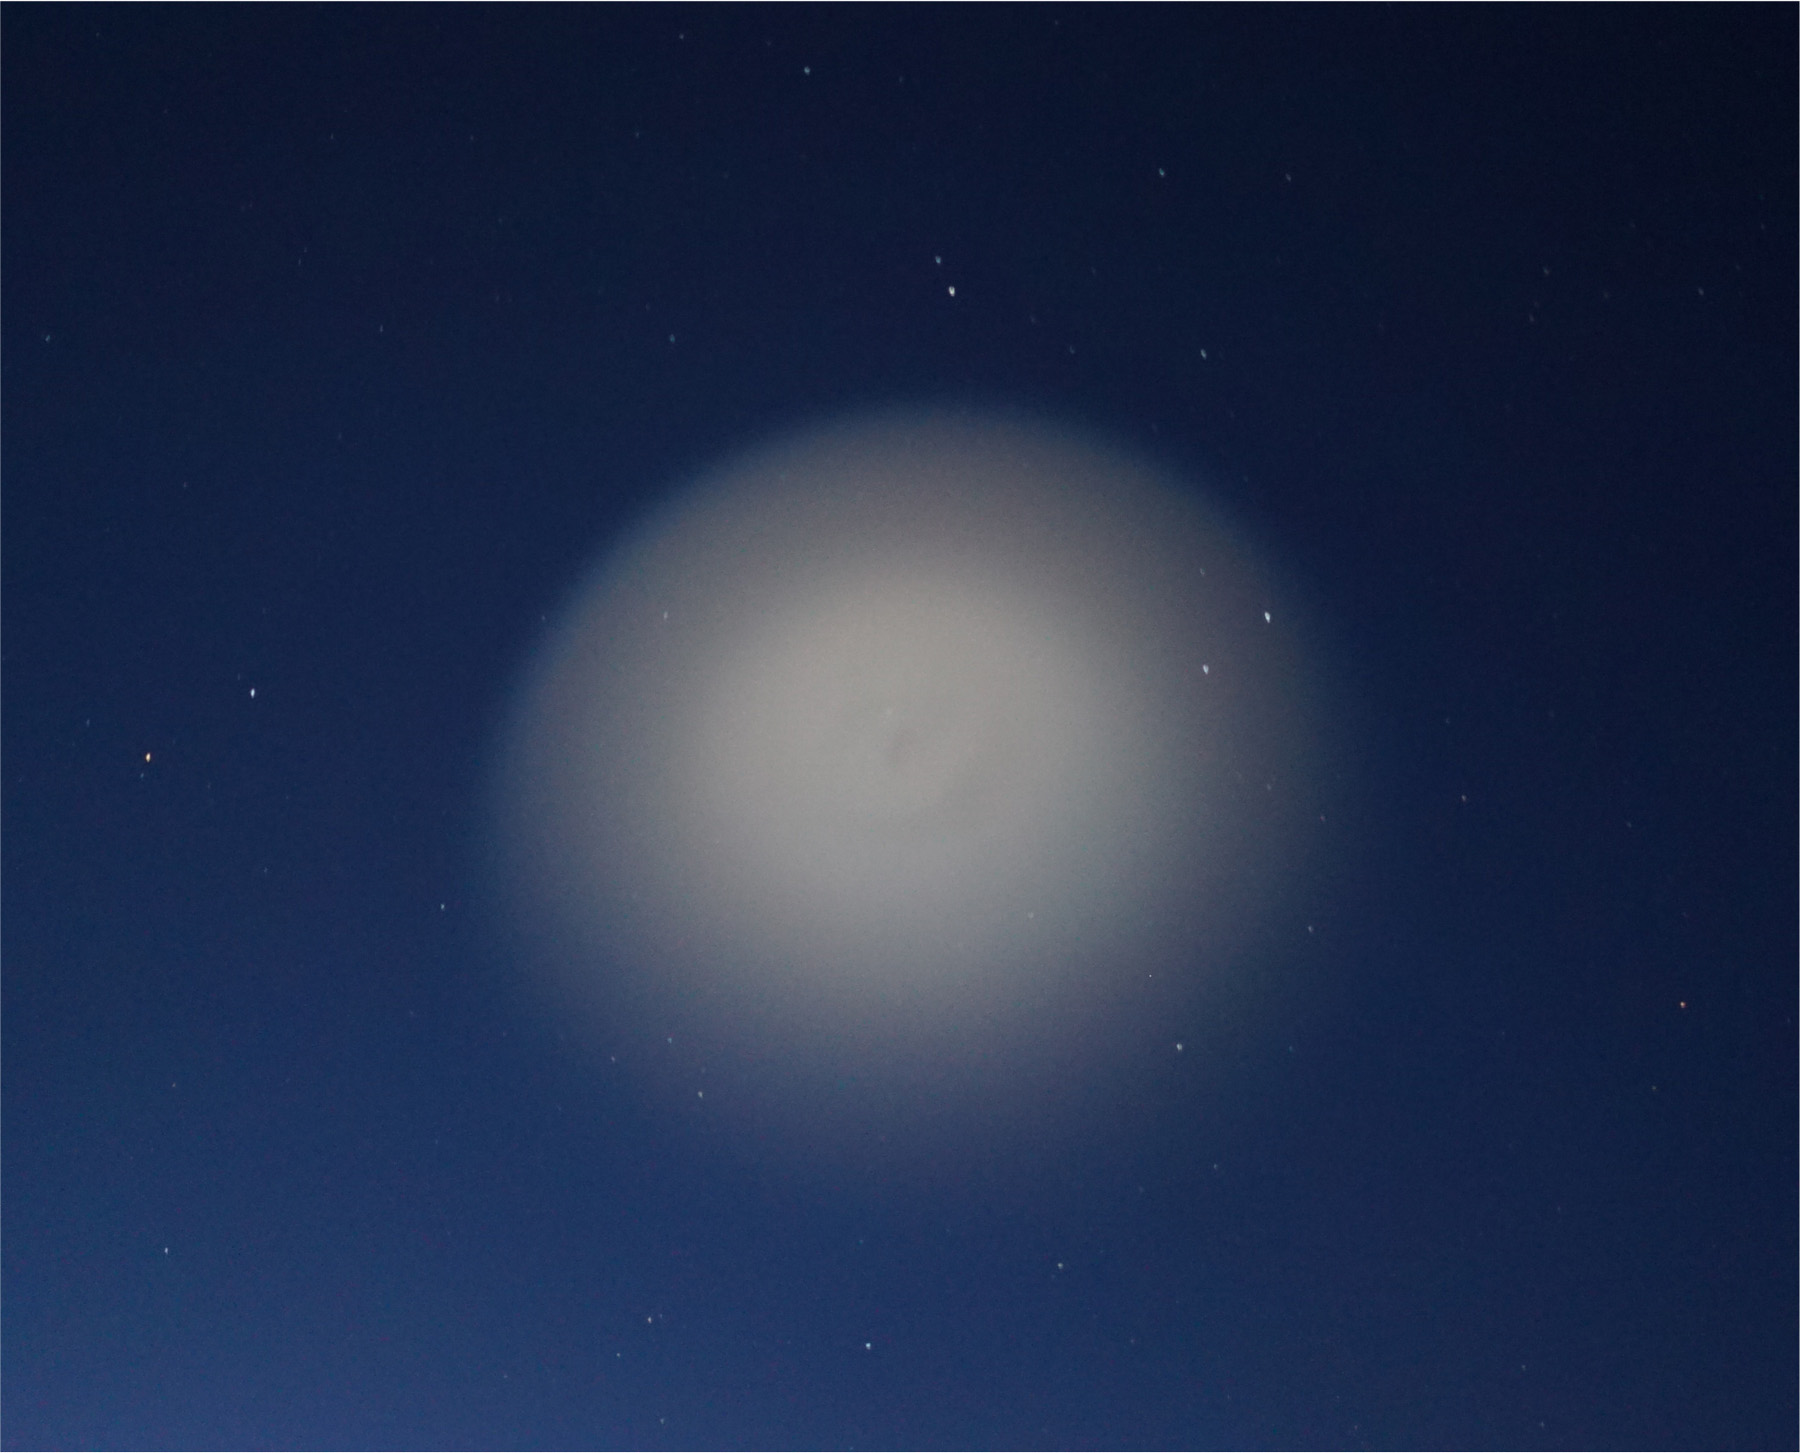 An Image of the Charged Aerosol Release Experiment (CARE II) dust cloud as observed from a NASA B200 aircraft using a Sony Alpha7S camera. The cloud shows an upward hemispherical expansion of the dust 45 seconds after ignition of the CARE II dust release designed by NRL and NASA/Wallops. The NASA/Wallops aircraft supported five camera systems provided by the Naval Research Laboratory, SRI International, University of Maryland, and NASA Goddard Space Flight Center. Photo courtesy of the University of Washington by Todd Anderson and SRI by Asti Bhatt.